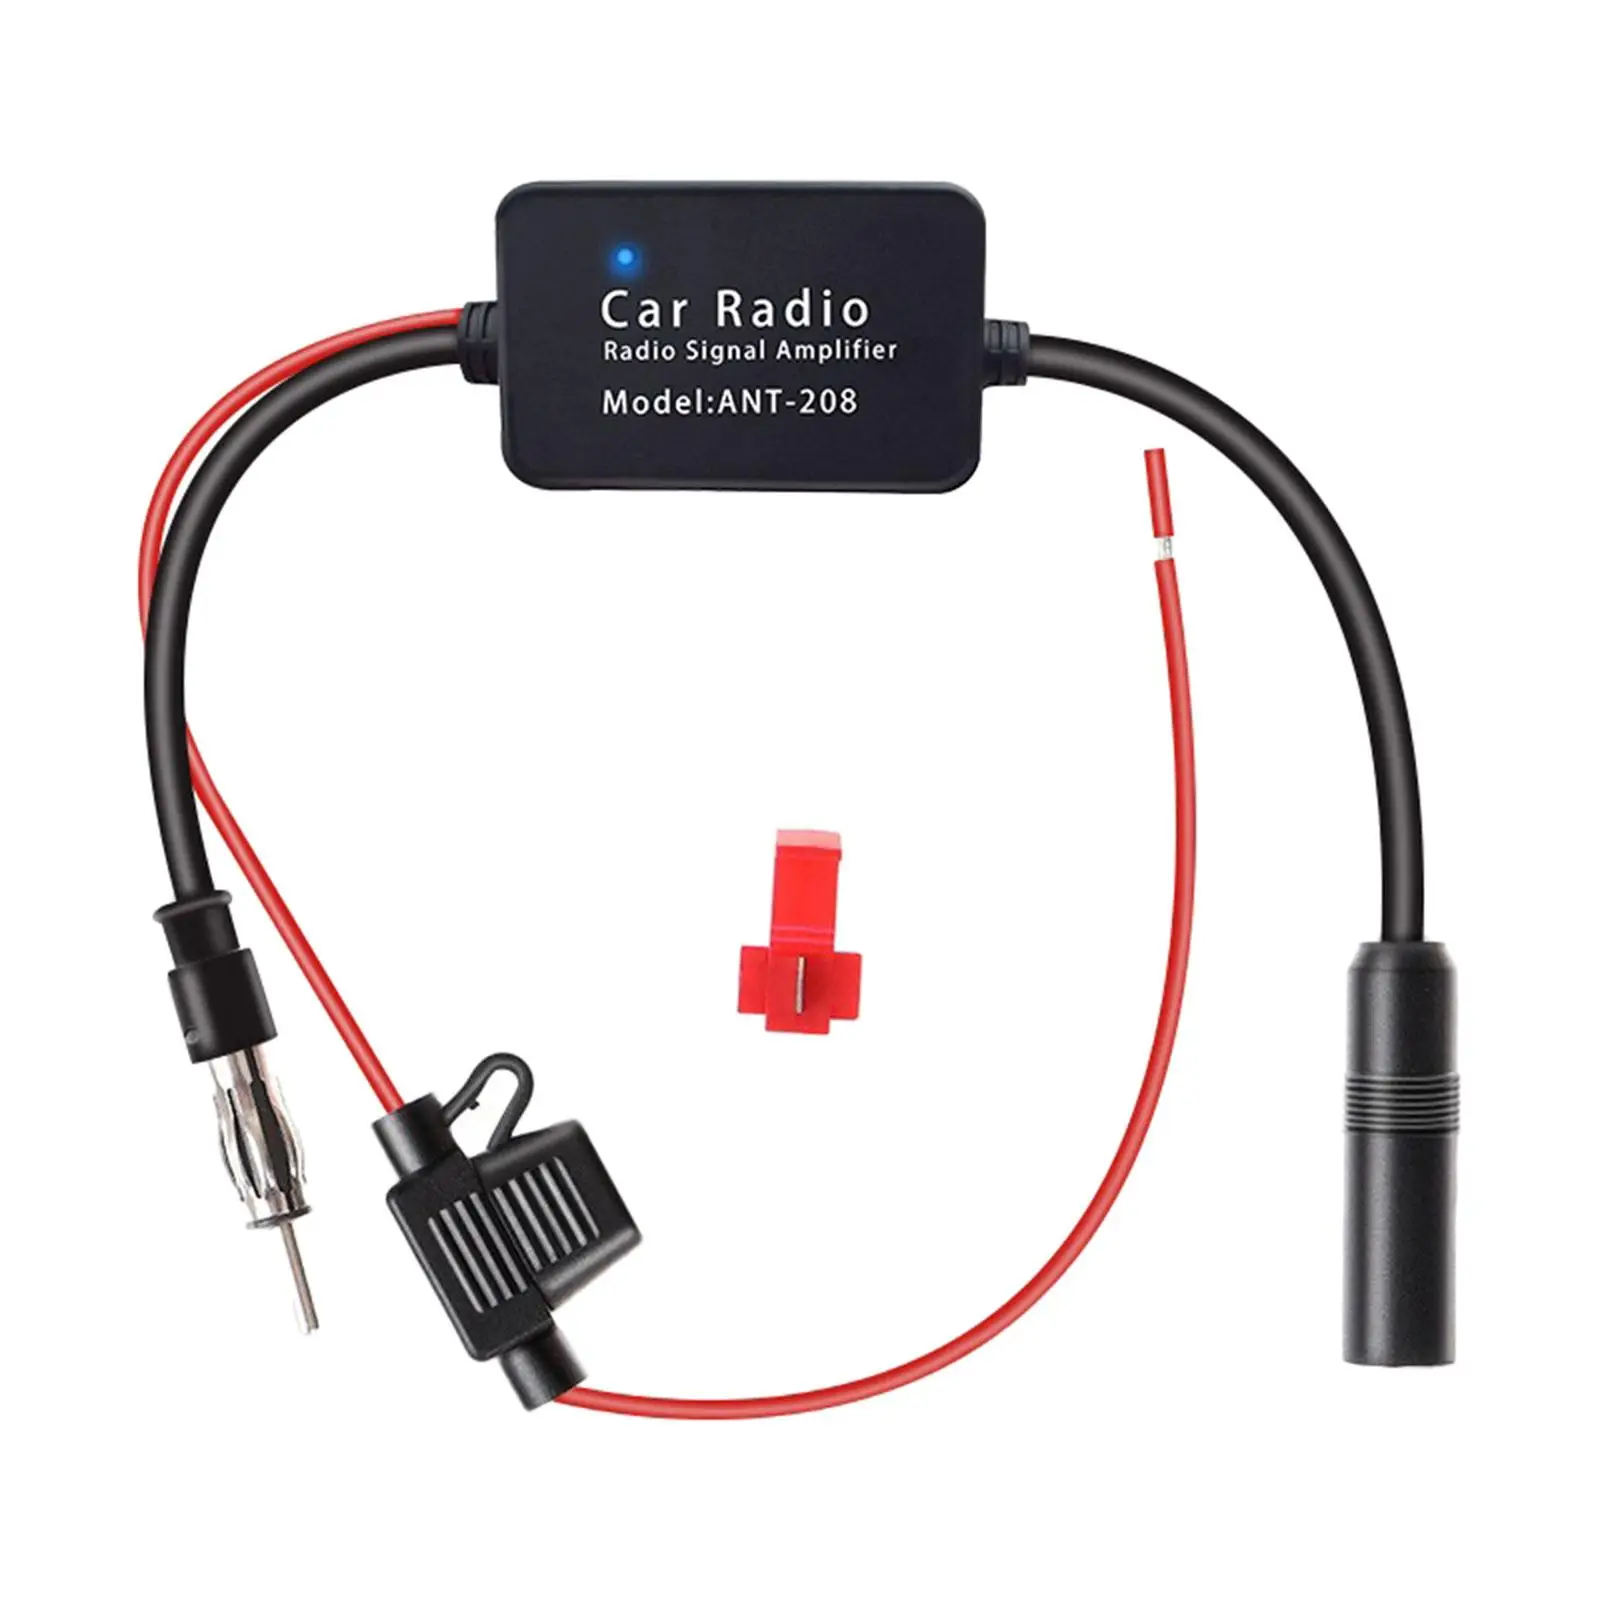 ANT-208 Car Radio Antenna Amplifier Universal for Auto Boat Accessories